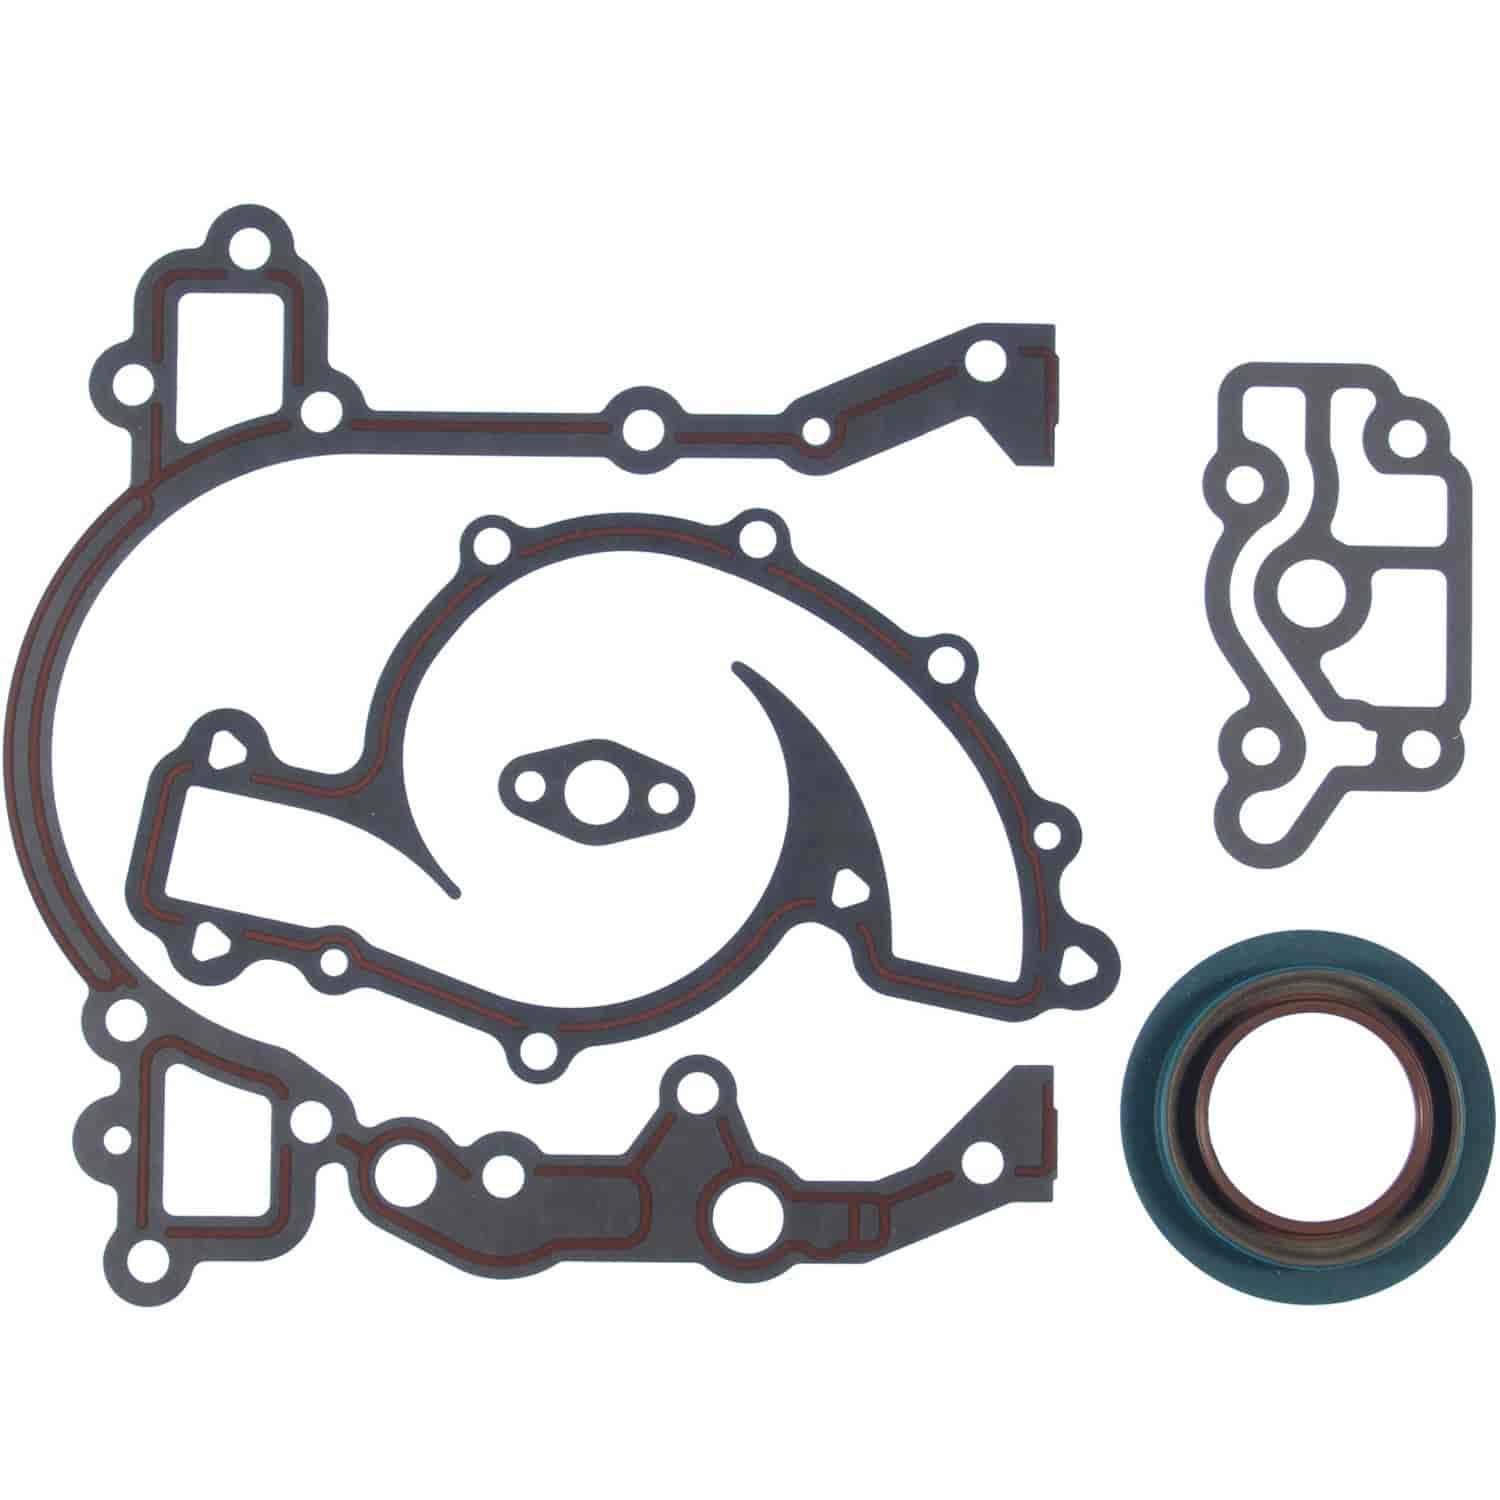 Timing Cover Set GM 3.0L 3.8L MFI Engs. 86-88